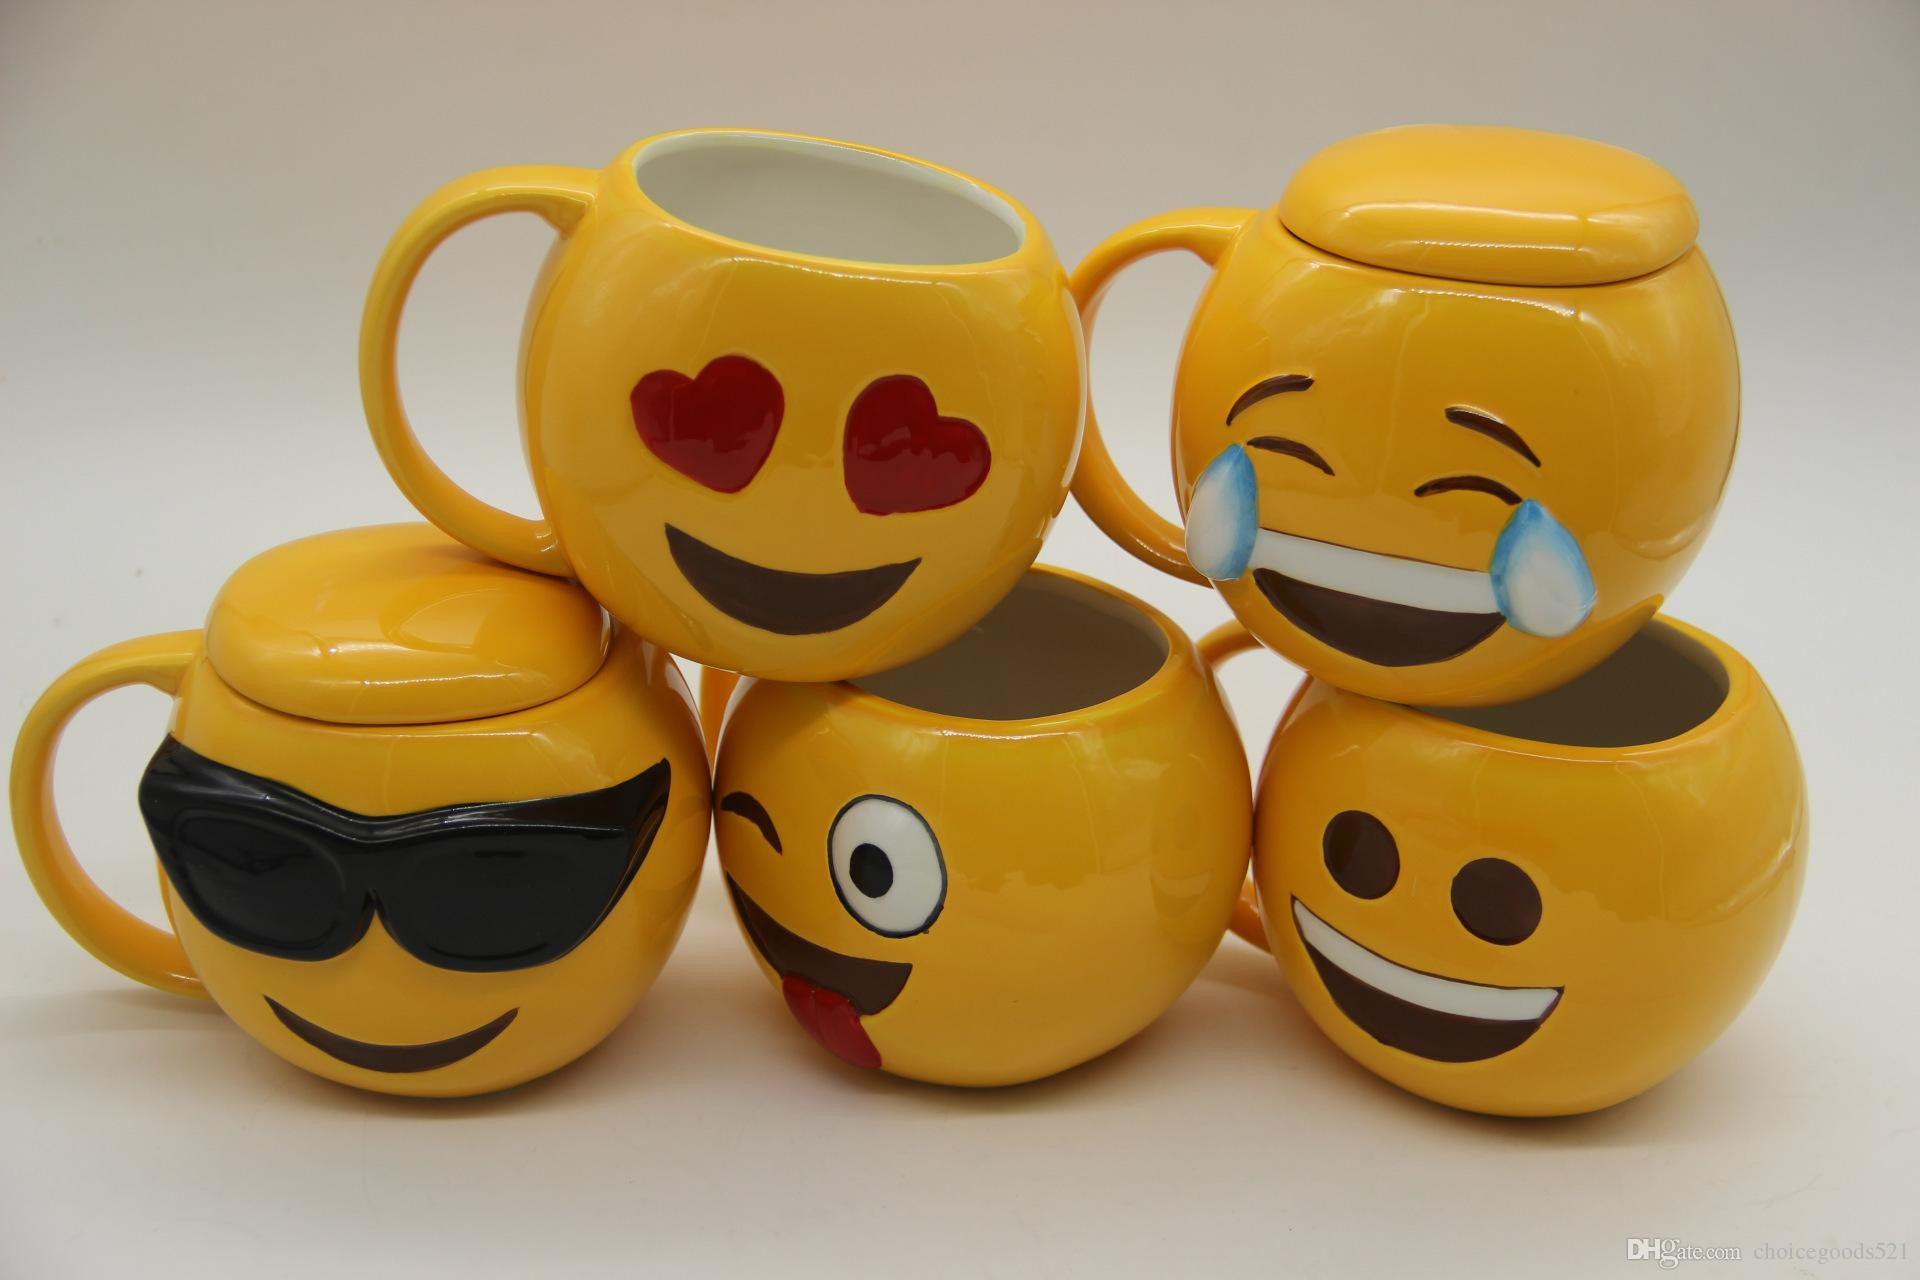 12 Nice Yellow Smiley Face Vase 2024 free download yellow smiley face vase of 6 designs lovely smiling face emoji mug porcelain poop shit cup with 6 designs lovely smiling face emoji mug porcelain poop shit cup cartoon amused and sad cool co